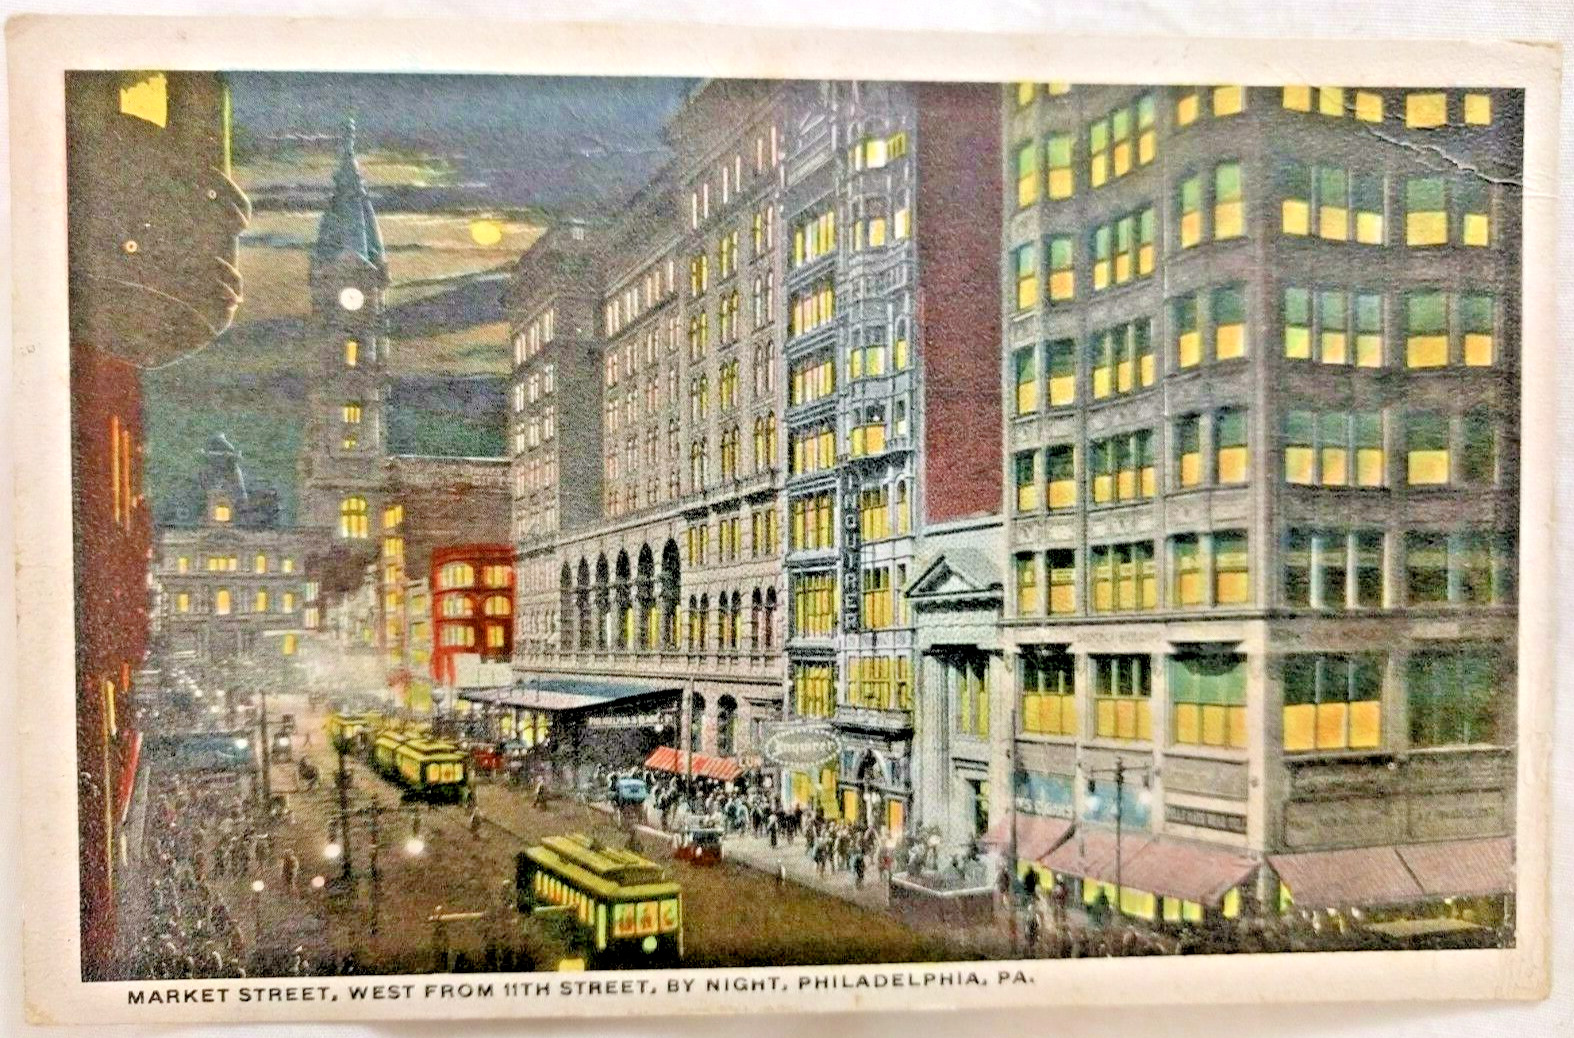 1917 Postcard: Philadelphia: Market St. West from 11th St. by night